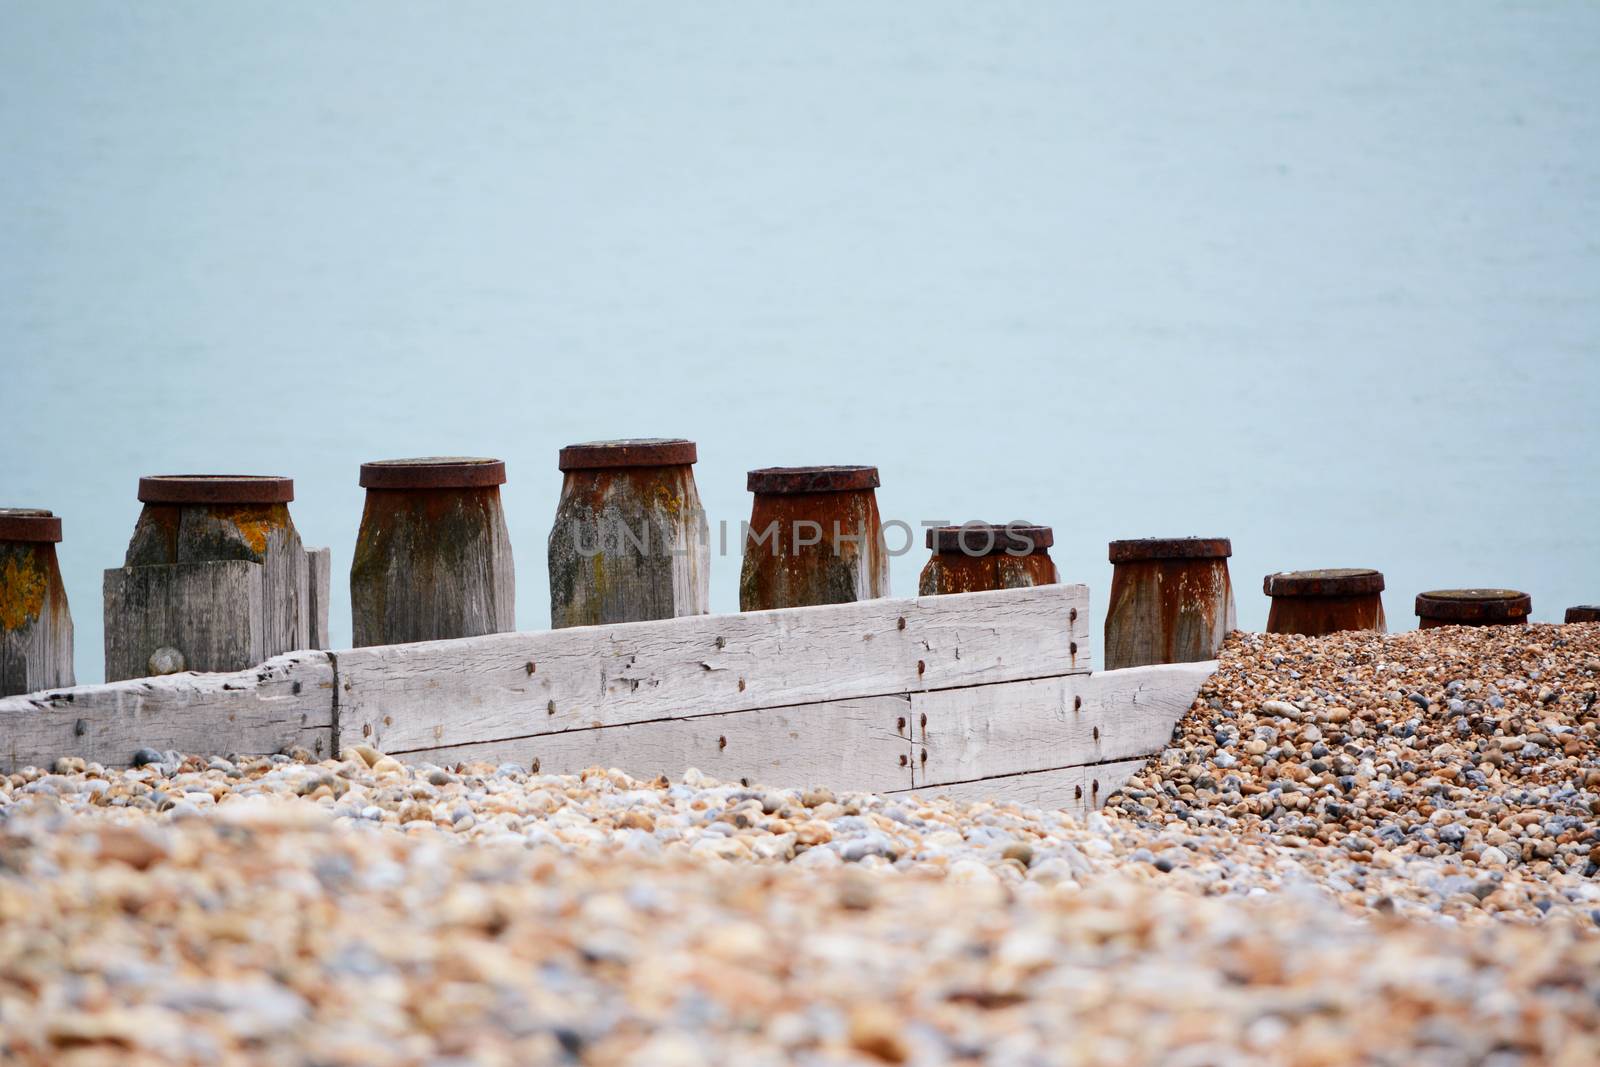 Wooden groynes form sea defences to prevent coastal erosion on shingle beach in Eastbourne, East Sussex